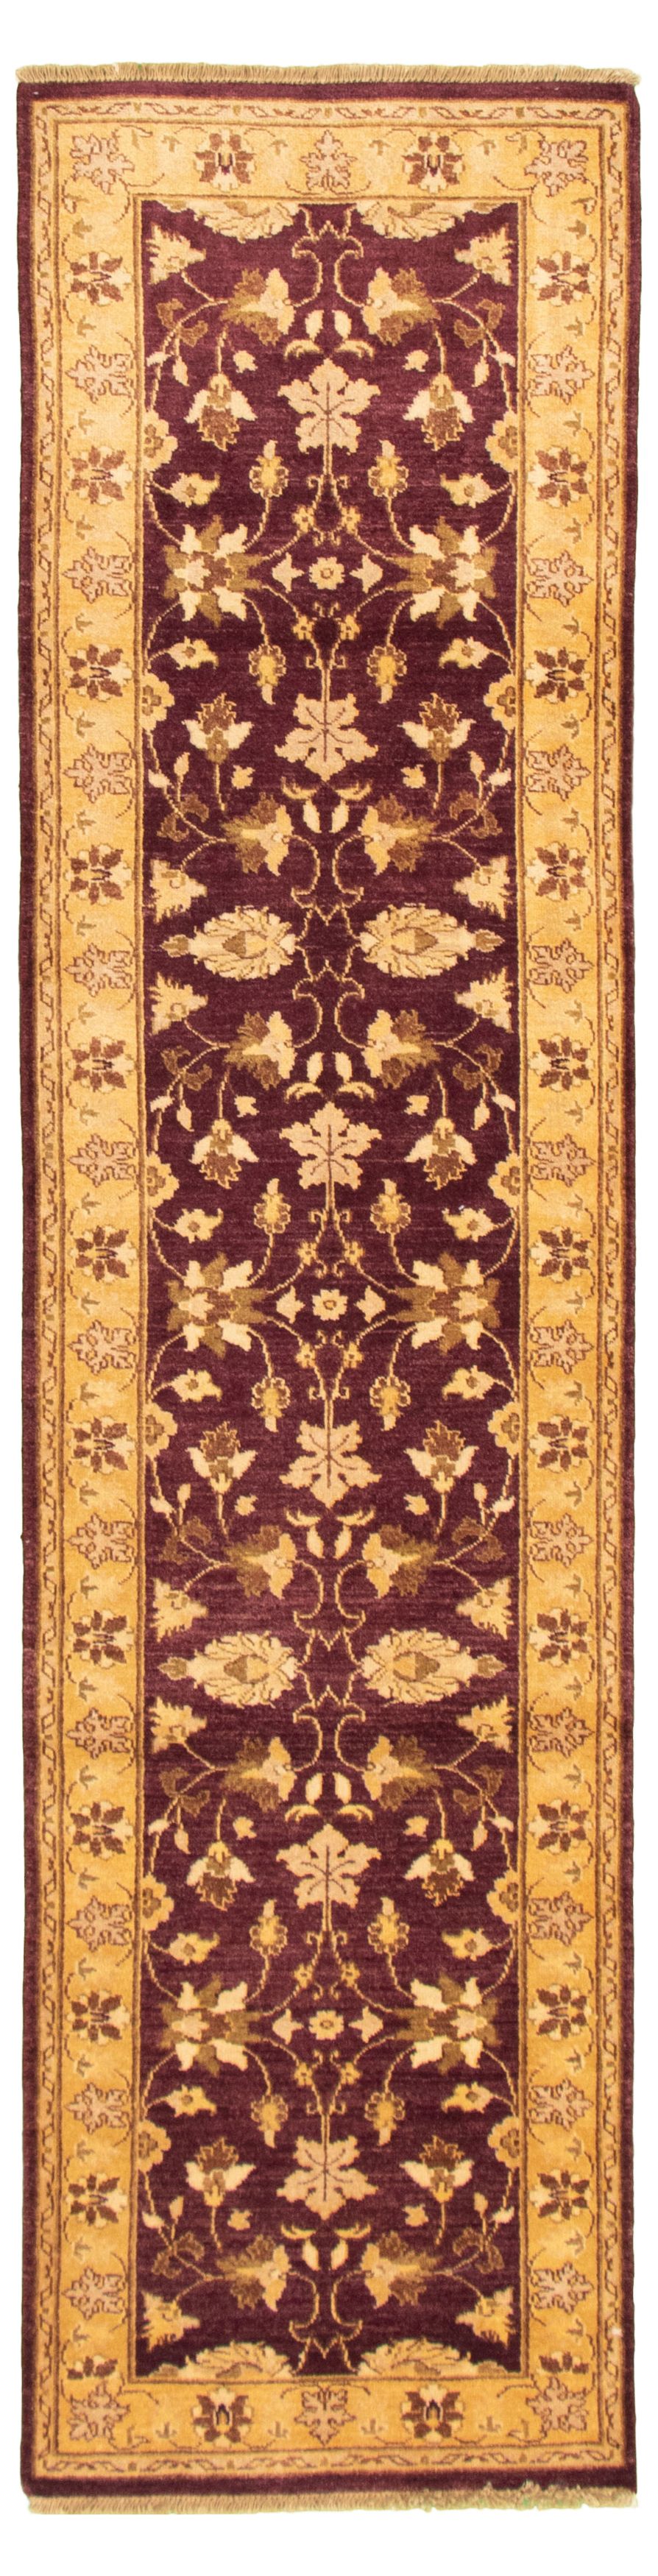 Hand-knotted Chobi Finest Burgundy Wool Rug 2'6" x 10'4" Size: 2'6" x 10'4"  